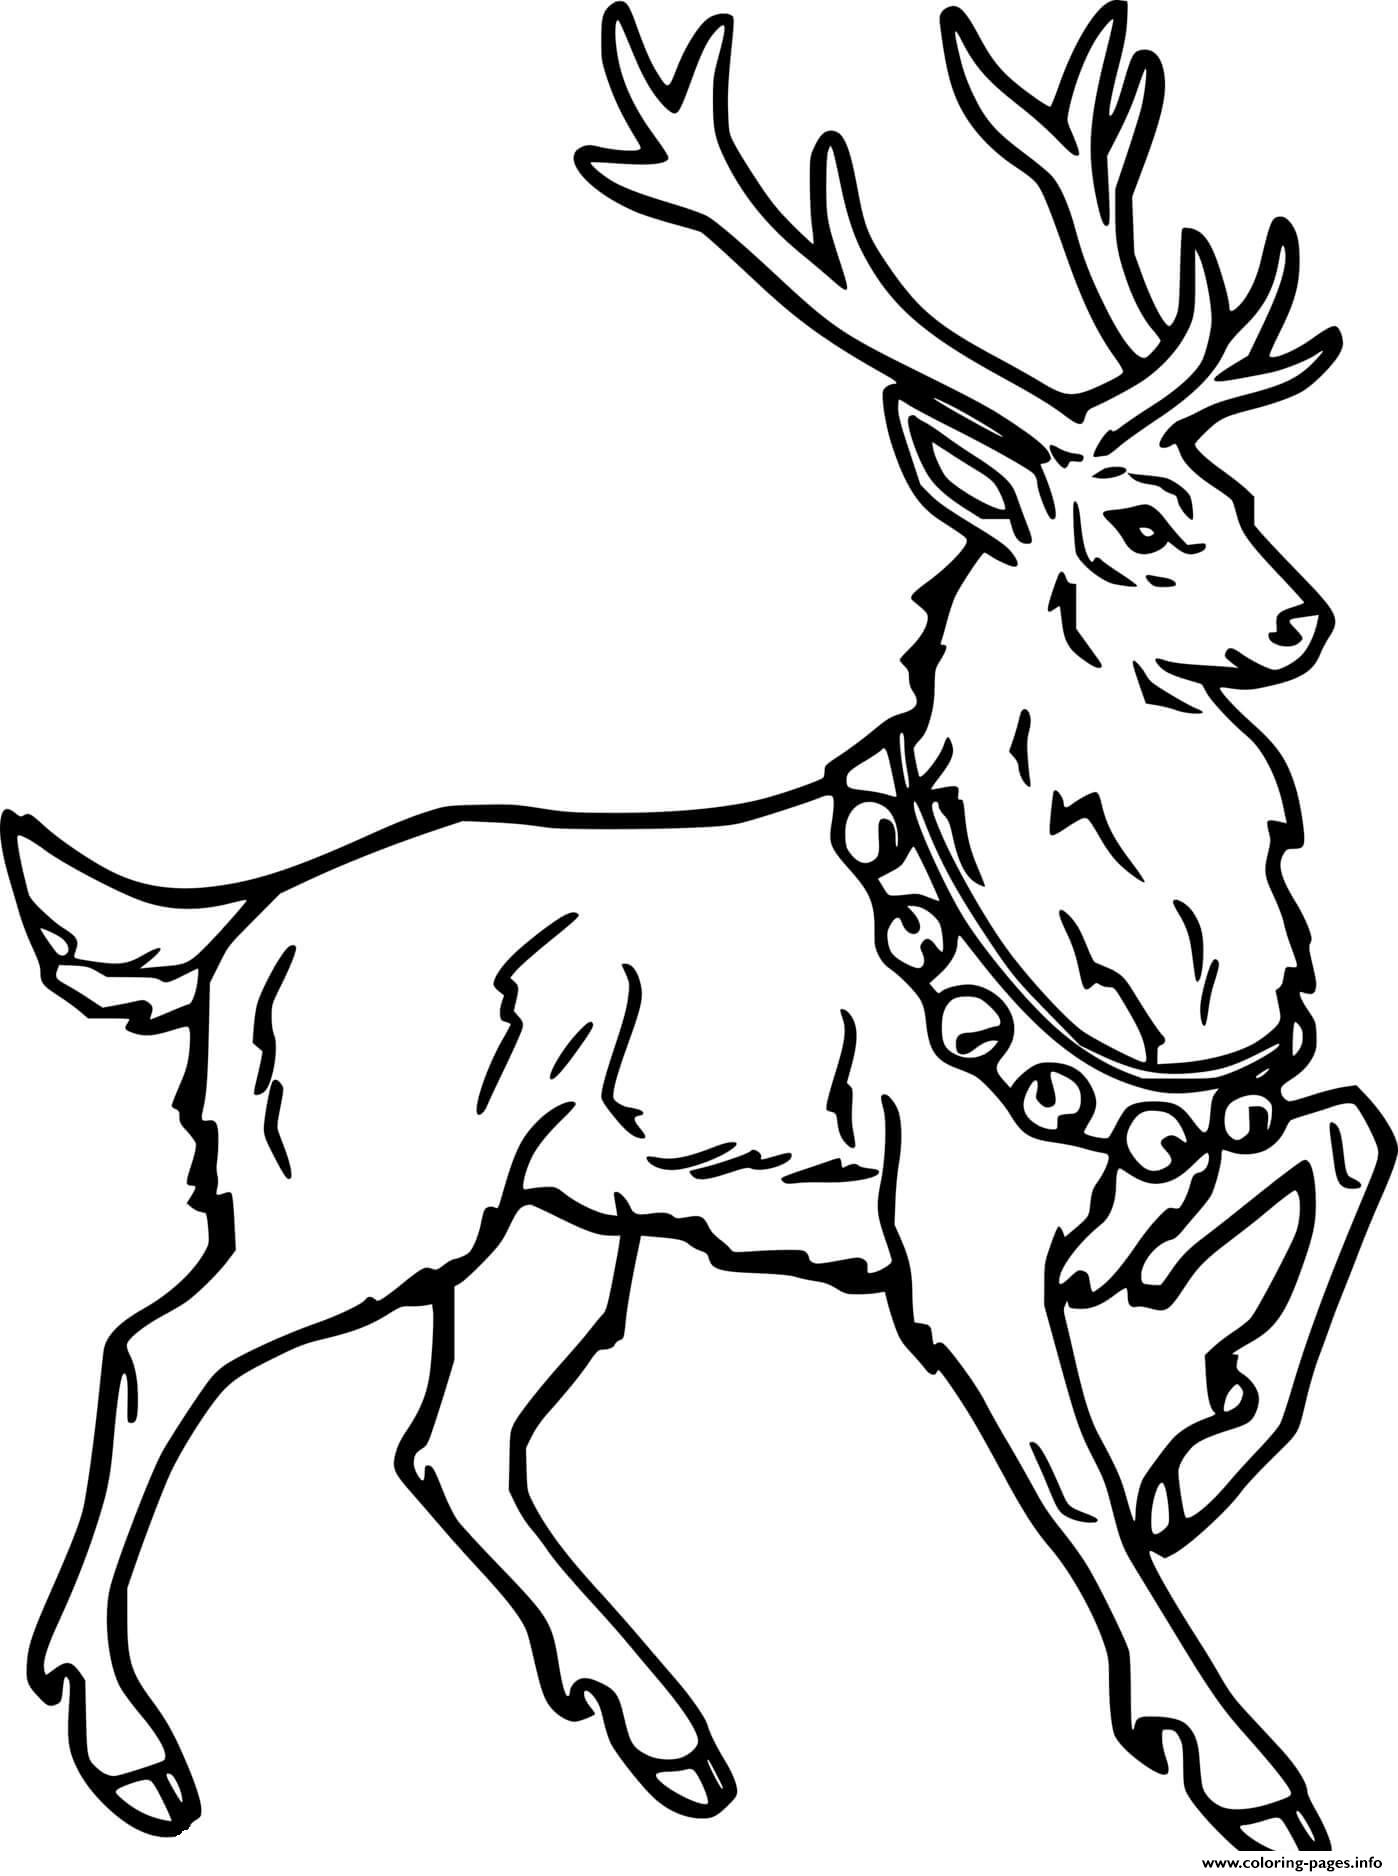 Coloring Pages Of Realistic Deer - Roe Deer Coloring Pages Free